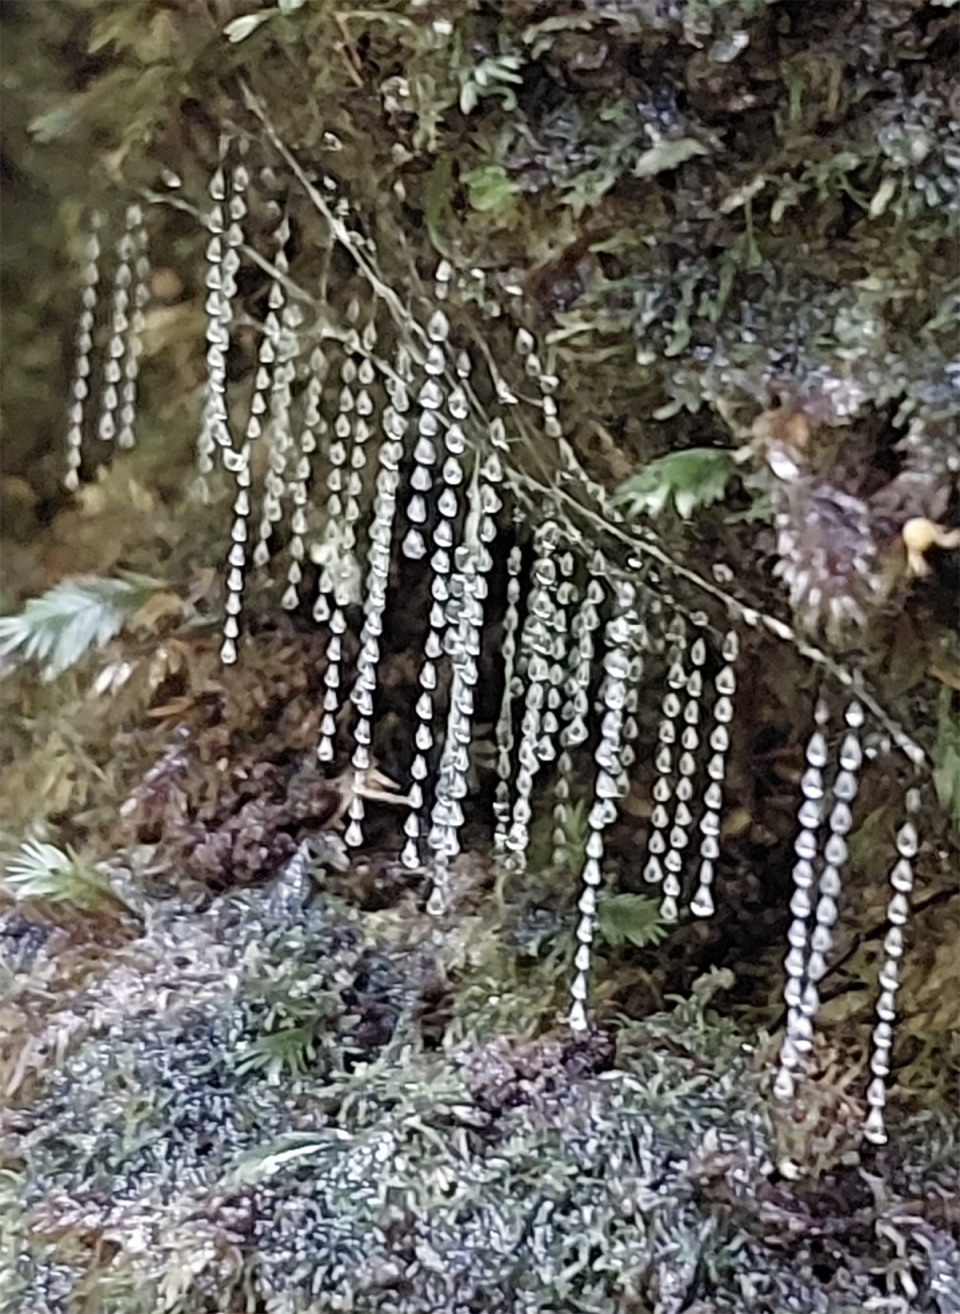 The glow worms in Lamington National park.